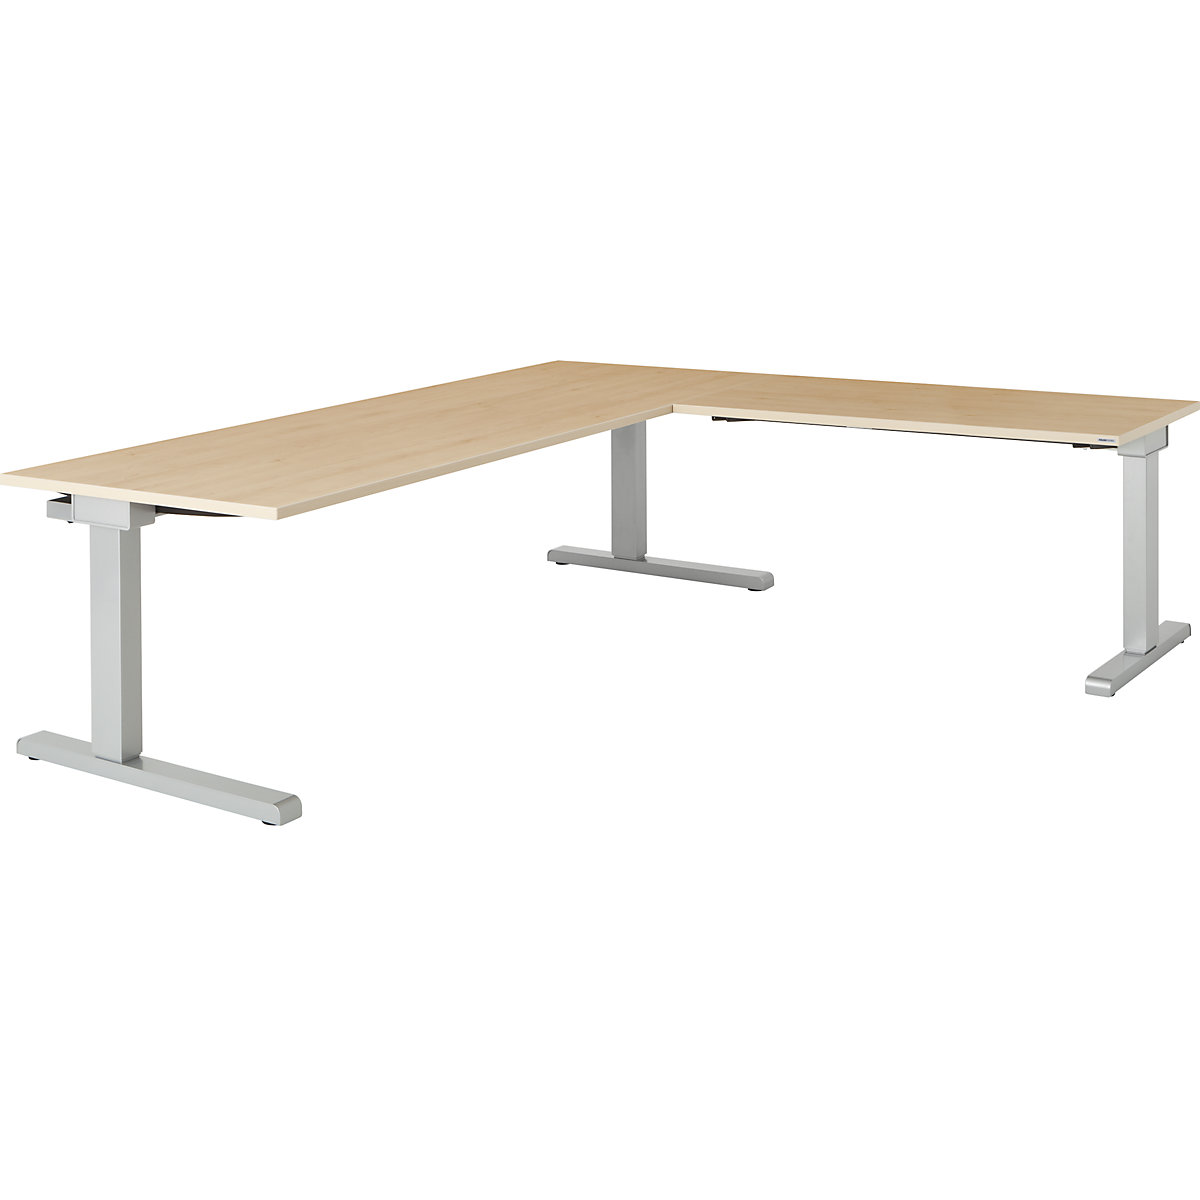 Desk, interlinked – mauser, WxD 2000 x 800 mm, angled extension on right (width 1200 mm), maple finish top, white aluminium frame-3